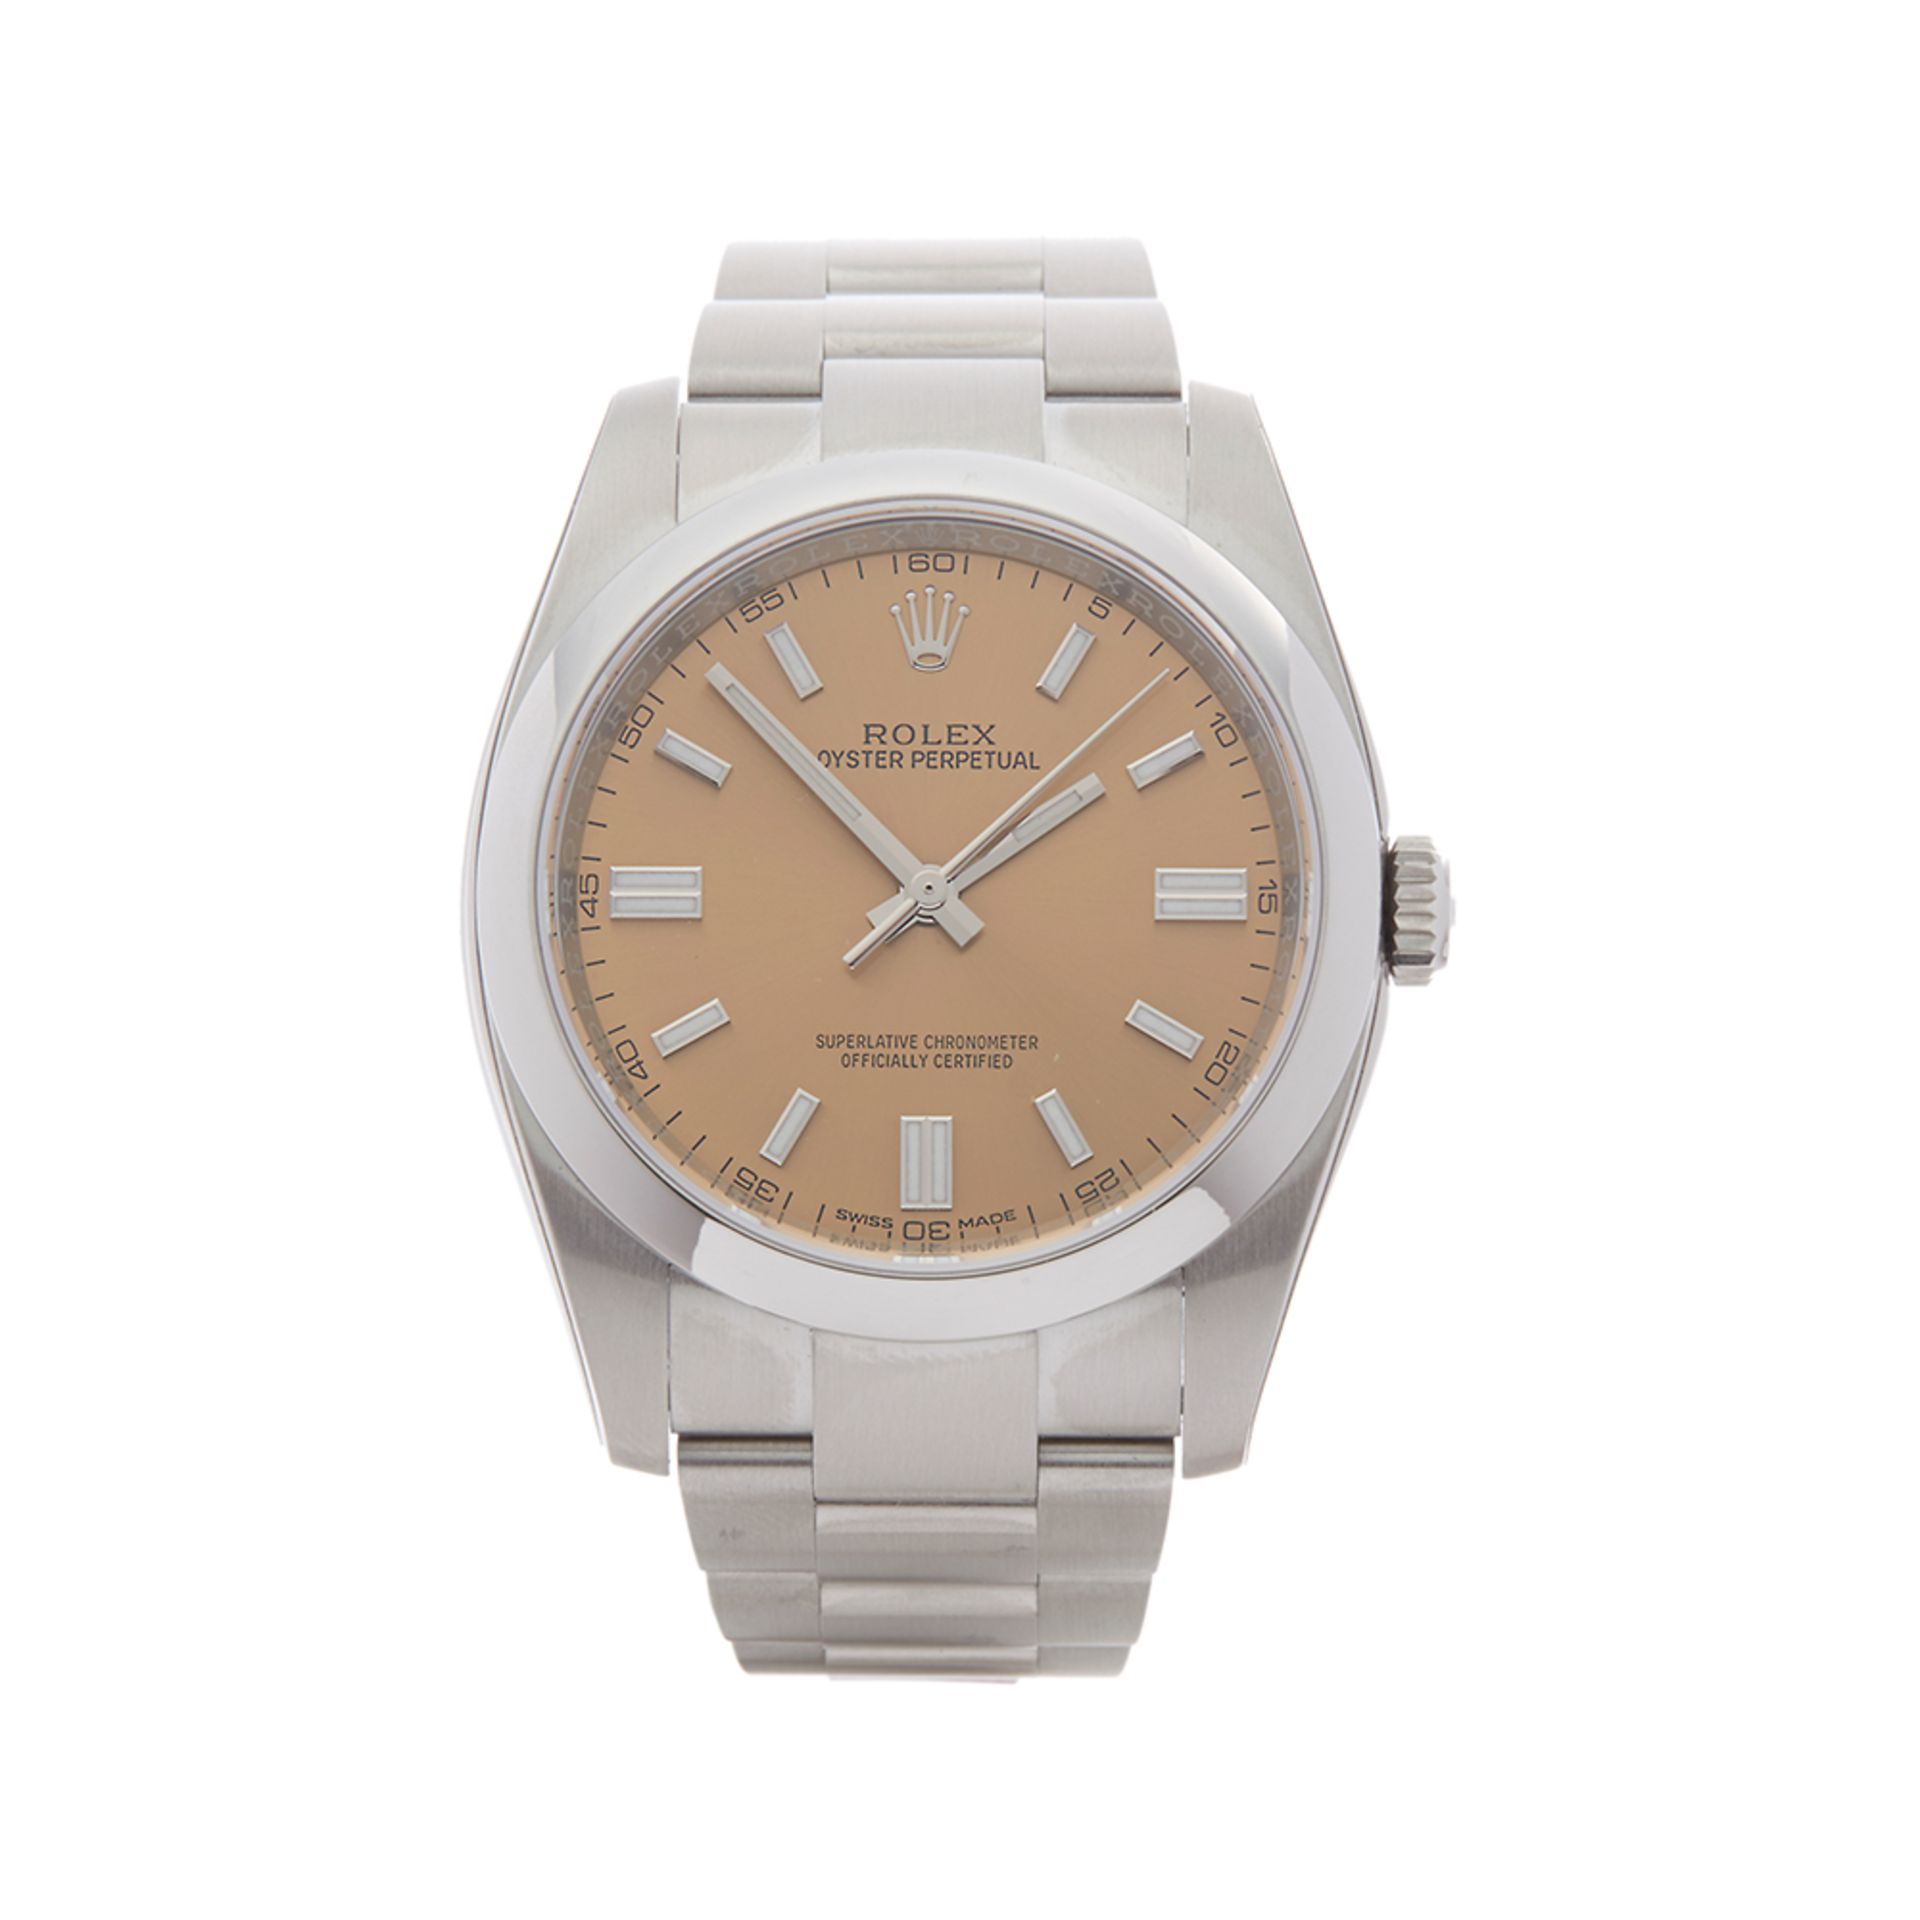 Rolex Oyster Perpetual 36mm Stainless Steel - 116000 - Image 2 of 7